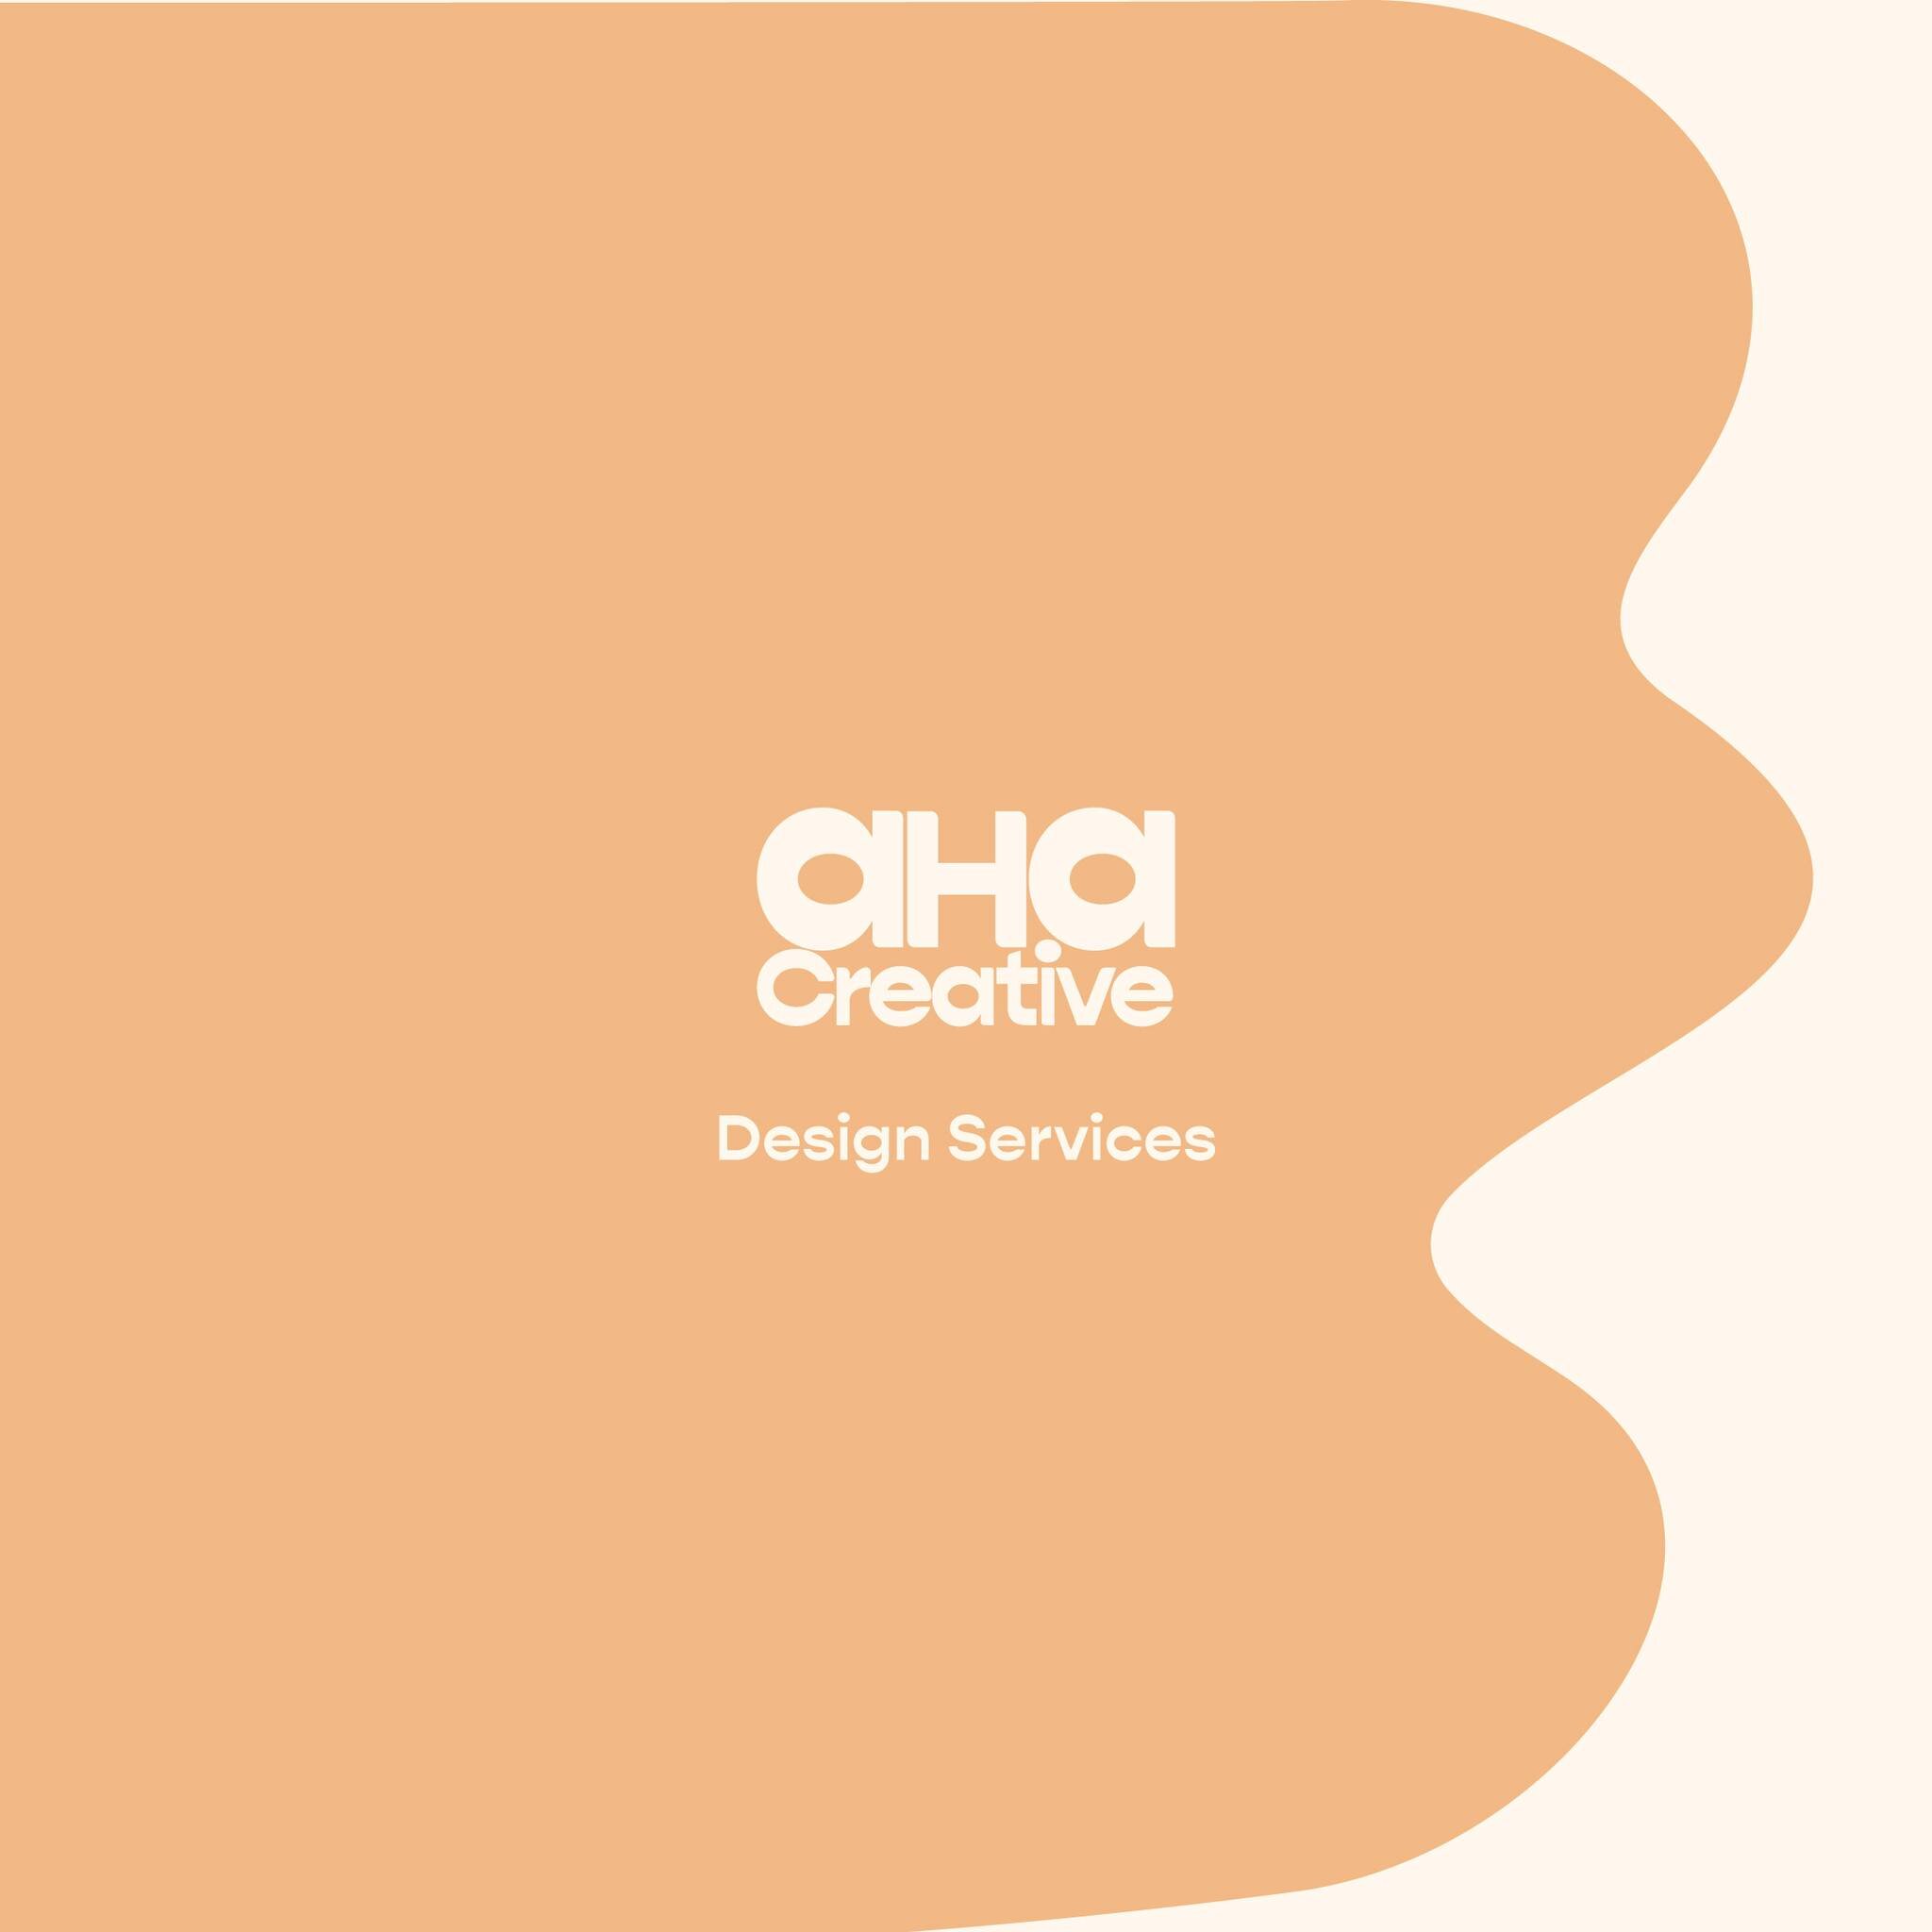 It's a new year so might be a great time to update you on what services we actually offer. Our goal is to be a complete creative business solution starting with the logo and brand identity of your business and offerring creative guidance and solution